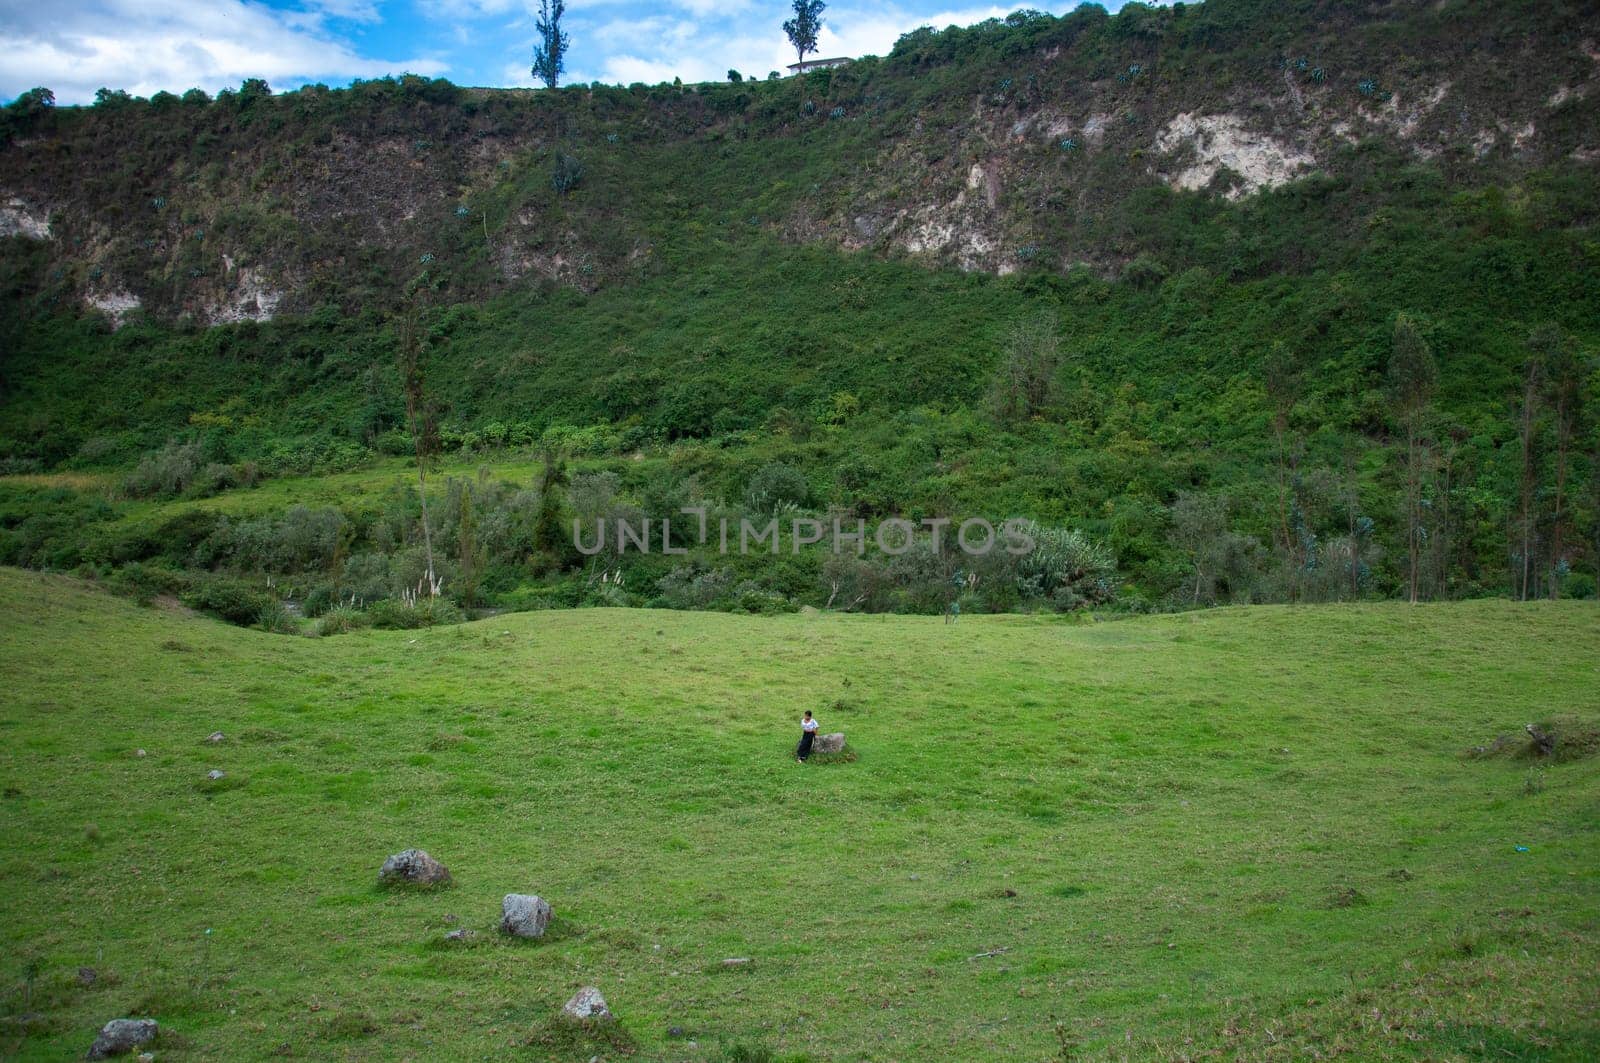 copyspace of natural canyon in ecuador full of vegetation, rocks, trees and a native woman dancing a native dance at the bottom of it. earth day by Raulmartin